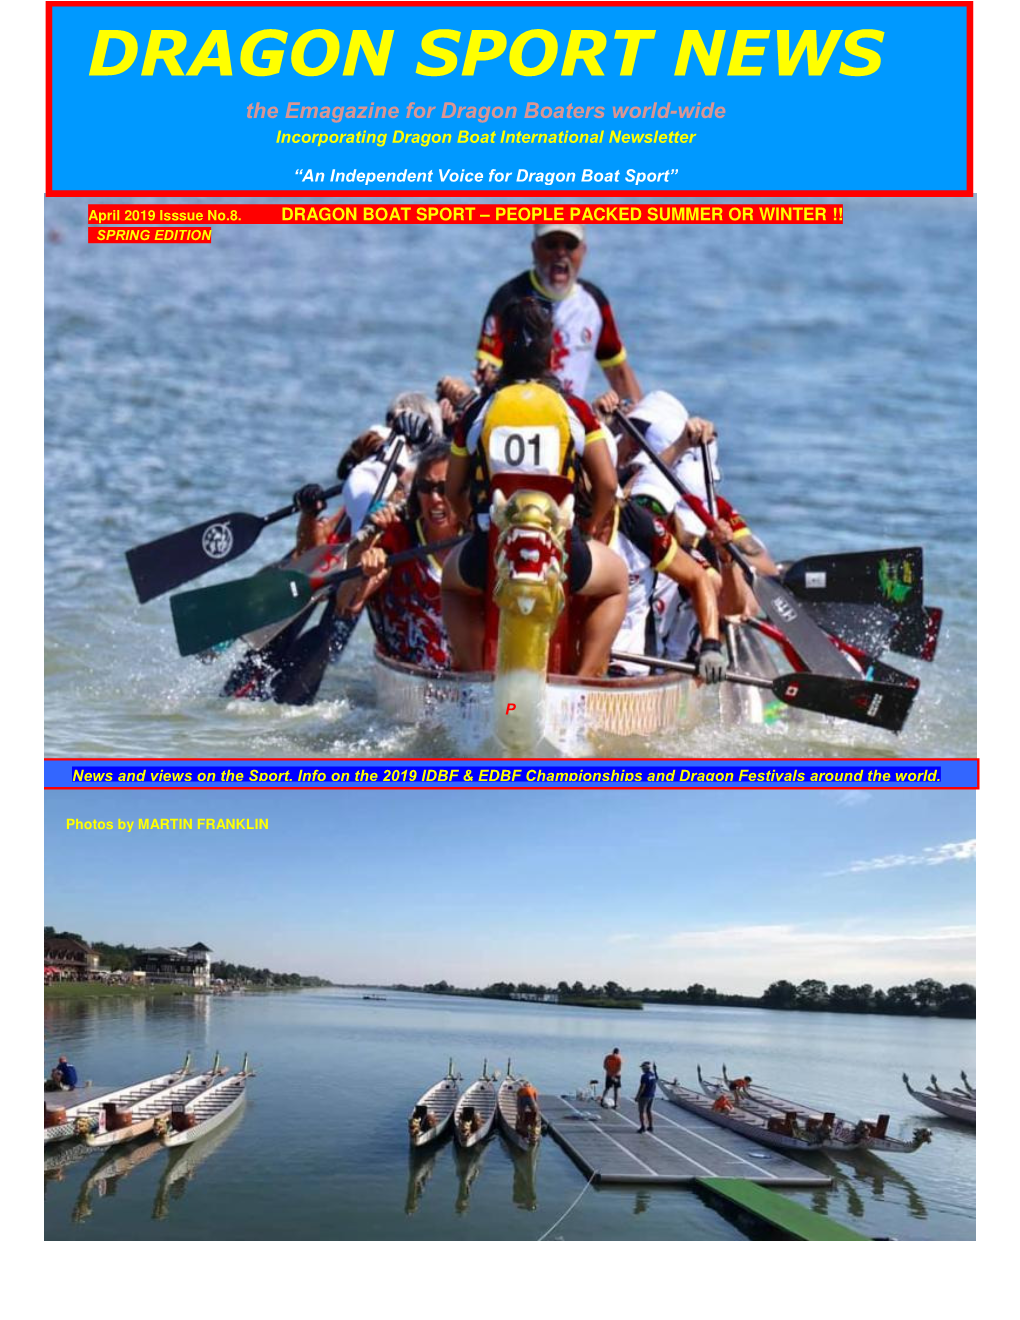 DRAGON SPORT NEWS the Emagazine for Dragon Boaters World-Wide